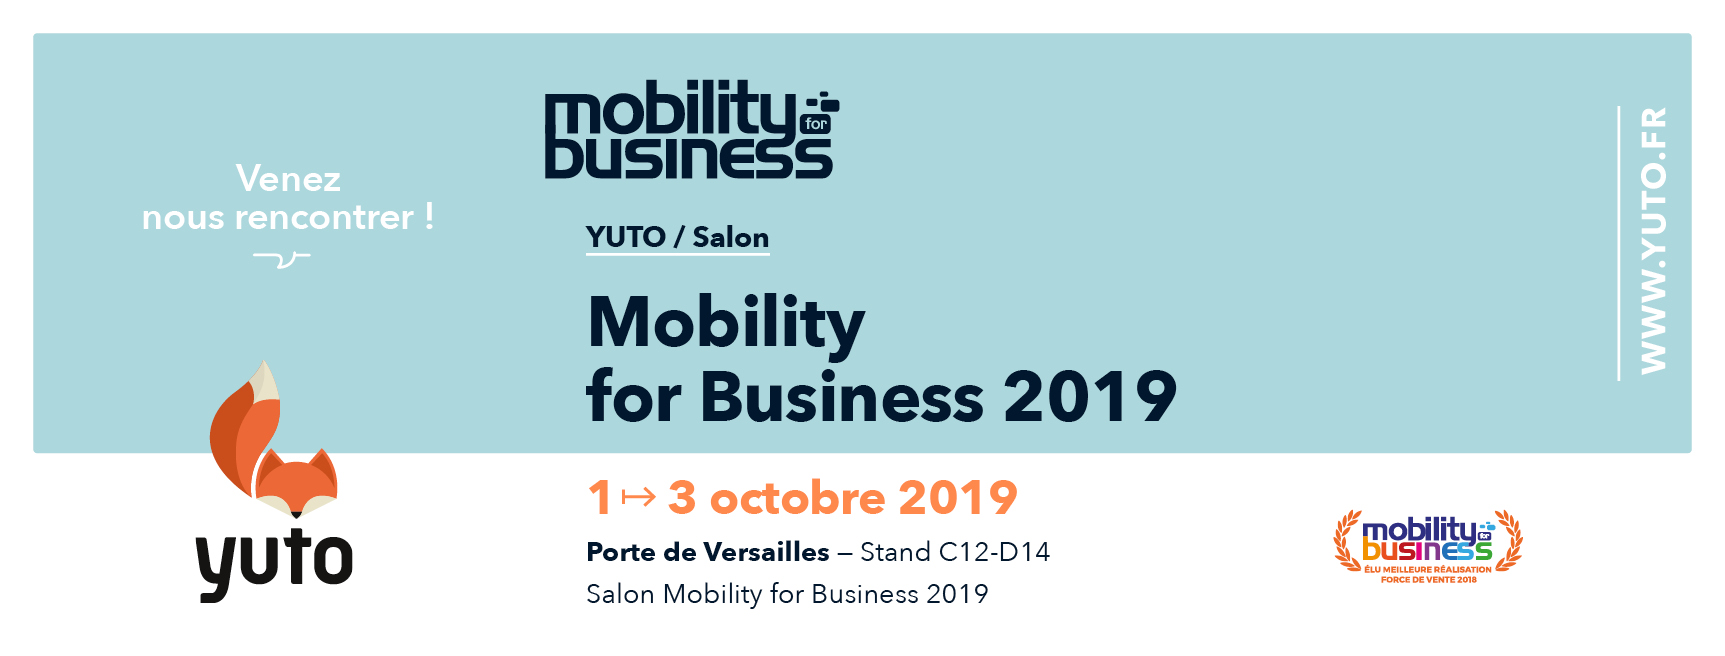 salon crm yuto Mobility For Business